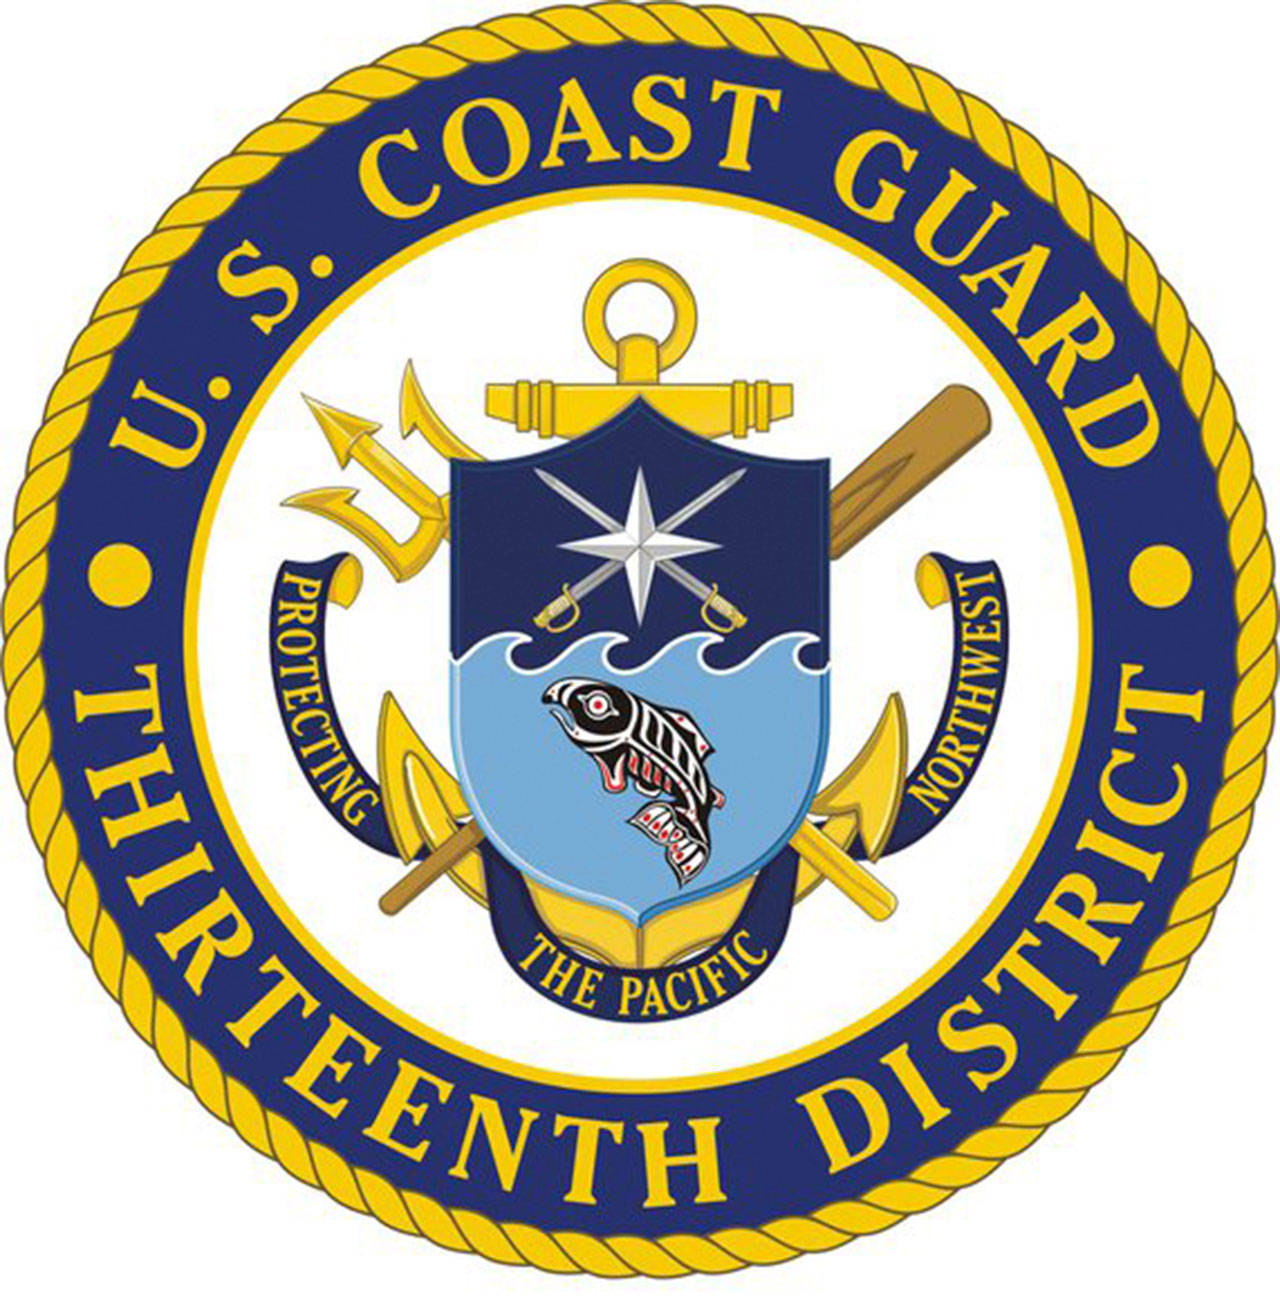 Coast guard transports Friday Harbor heart-attack patient to mainland